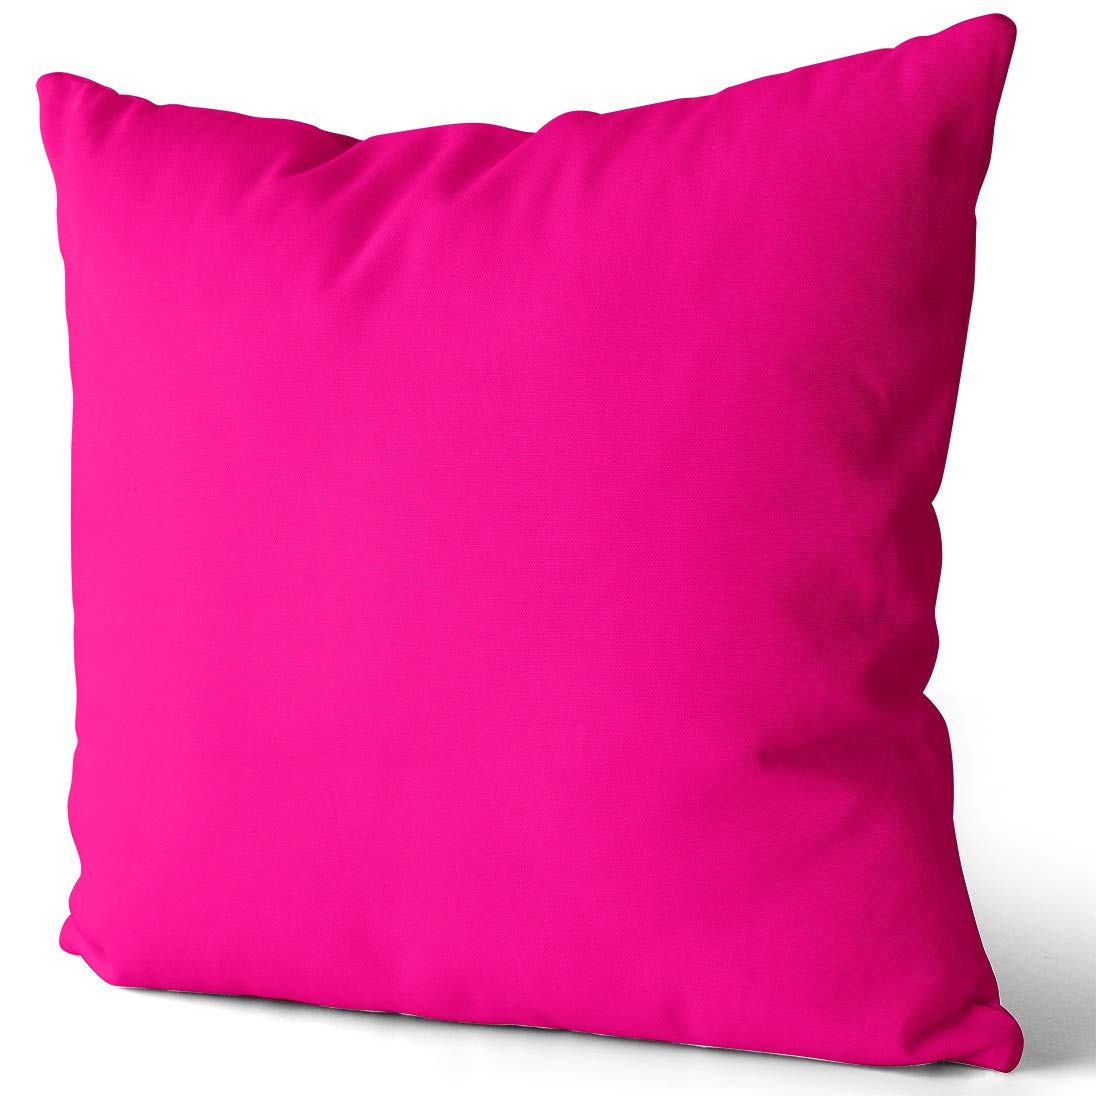 KELEMO Home Set of 2 Pillow Case Girly Fushia Hot Pink Friendly Throw Pillow Covers Cushion Decorative Pillowcase Square 18 x 18 Inches